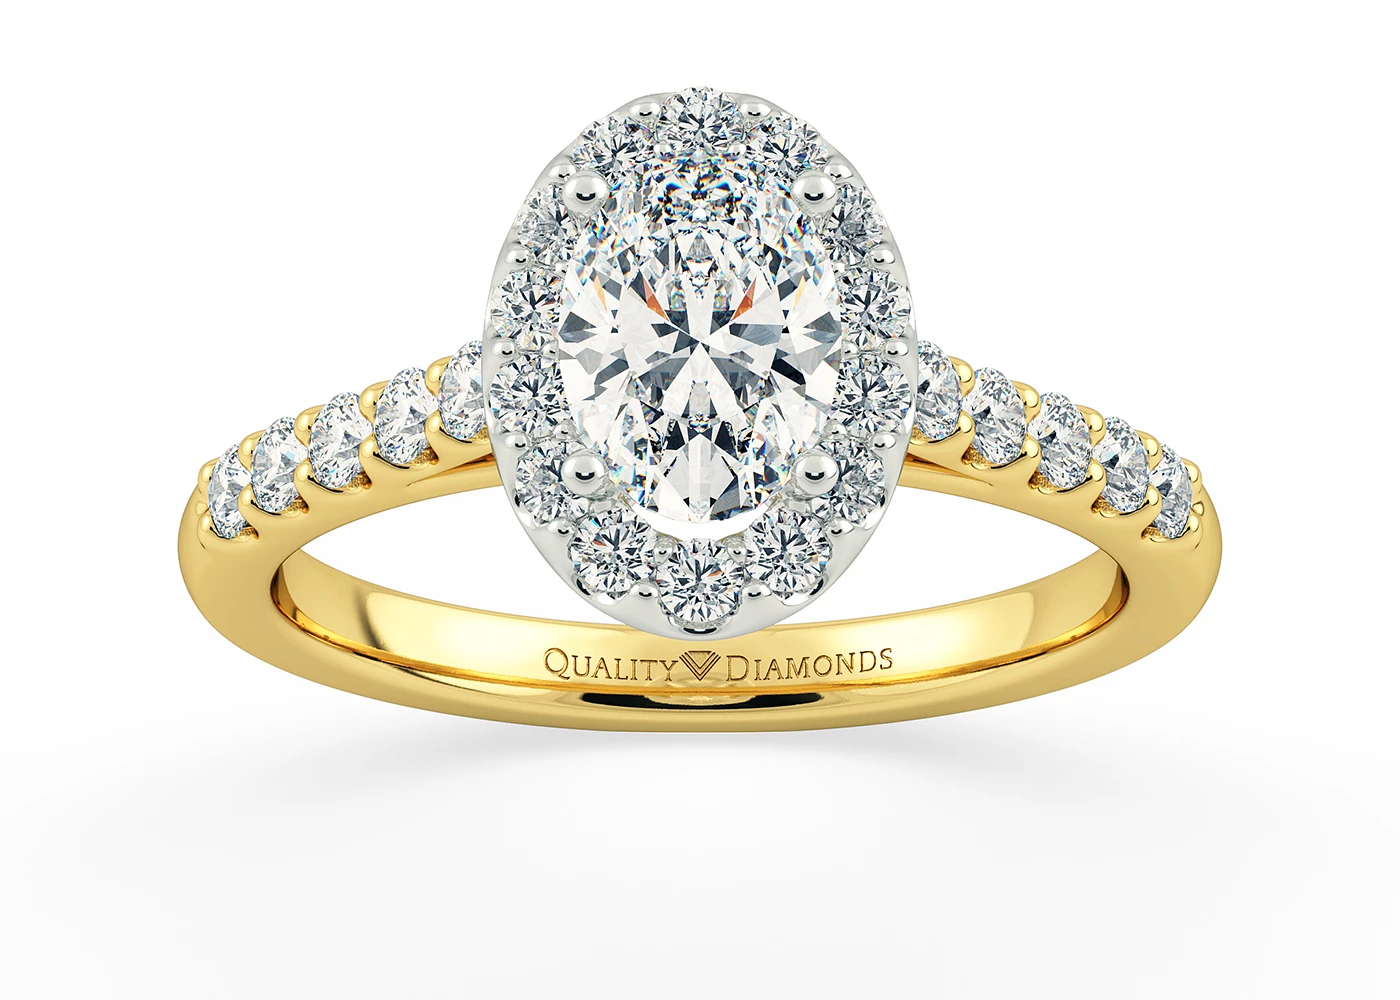 One Carat Oval Halo Diamond Ring in 18K Yellow Gold